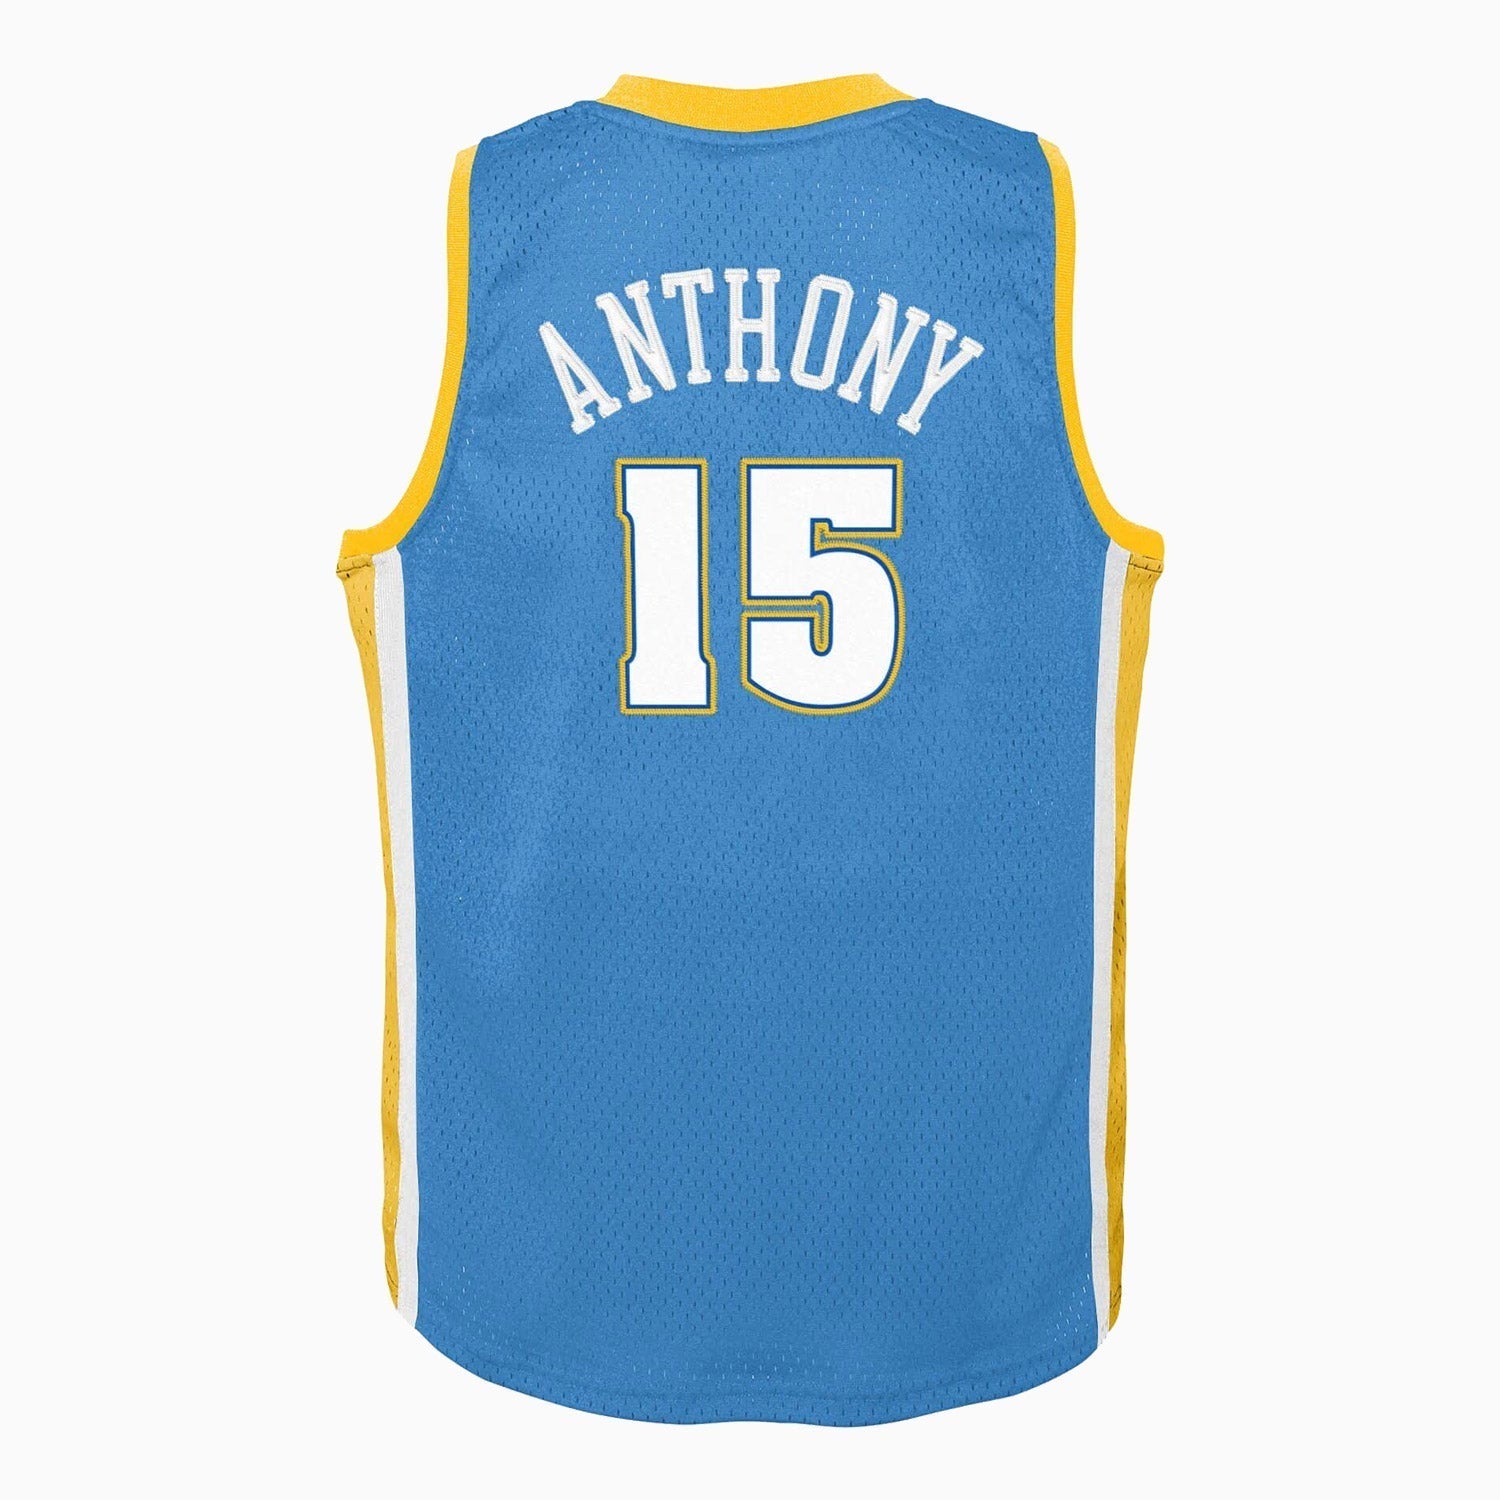 mitchell-and-ness-swingman-carmelo-anthony-denver-nuggets-nba-2003-04-jersey-youth-9n2b7brd0-nugca-y03